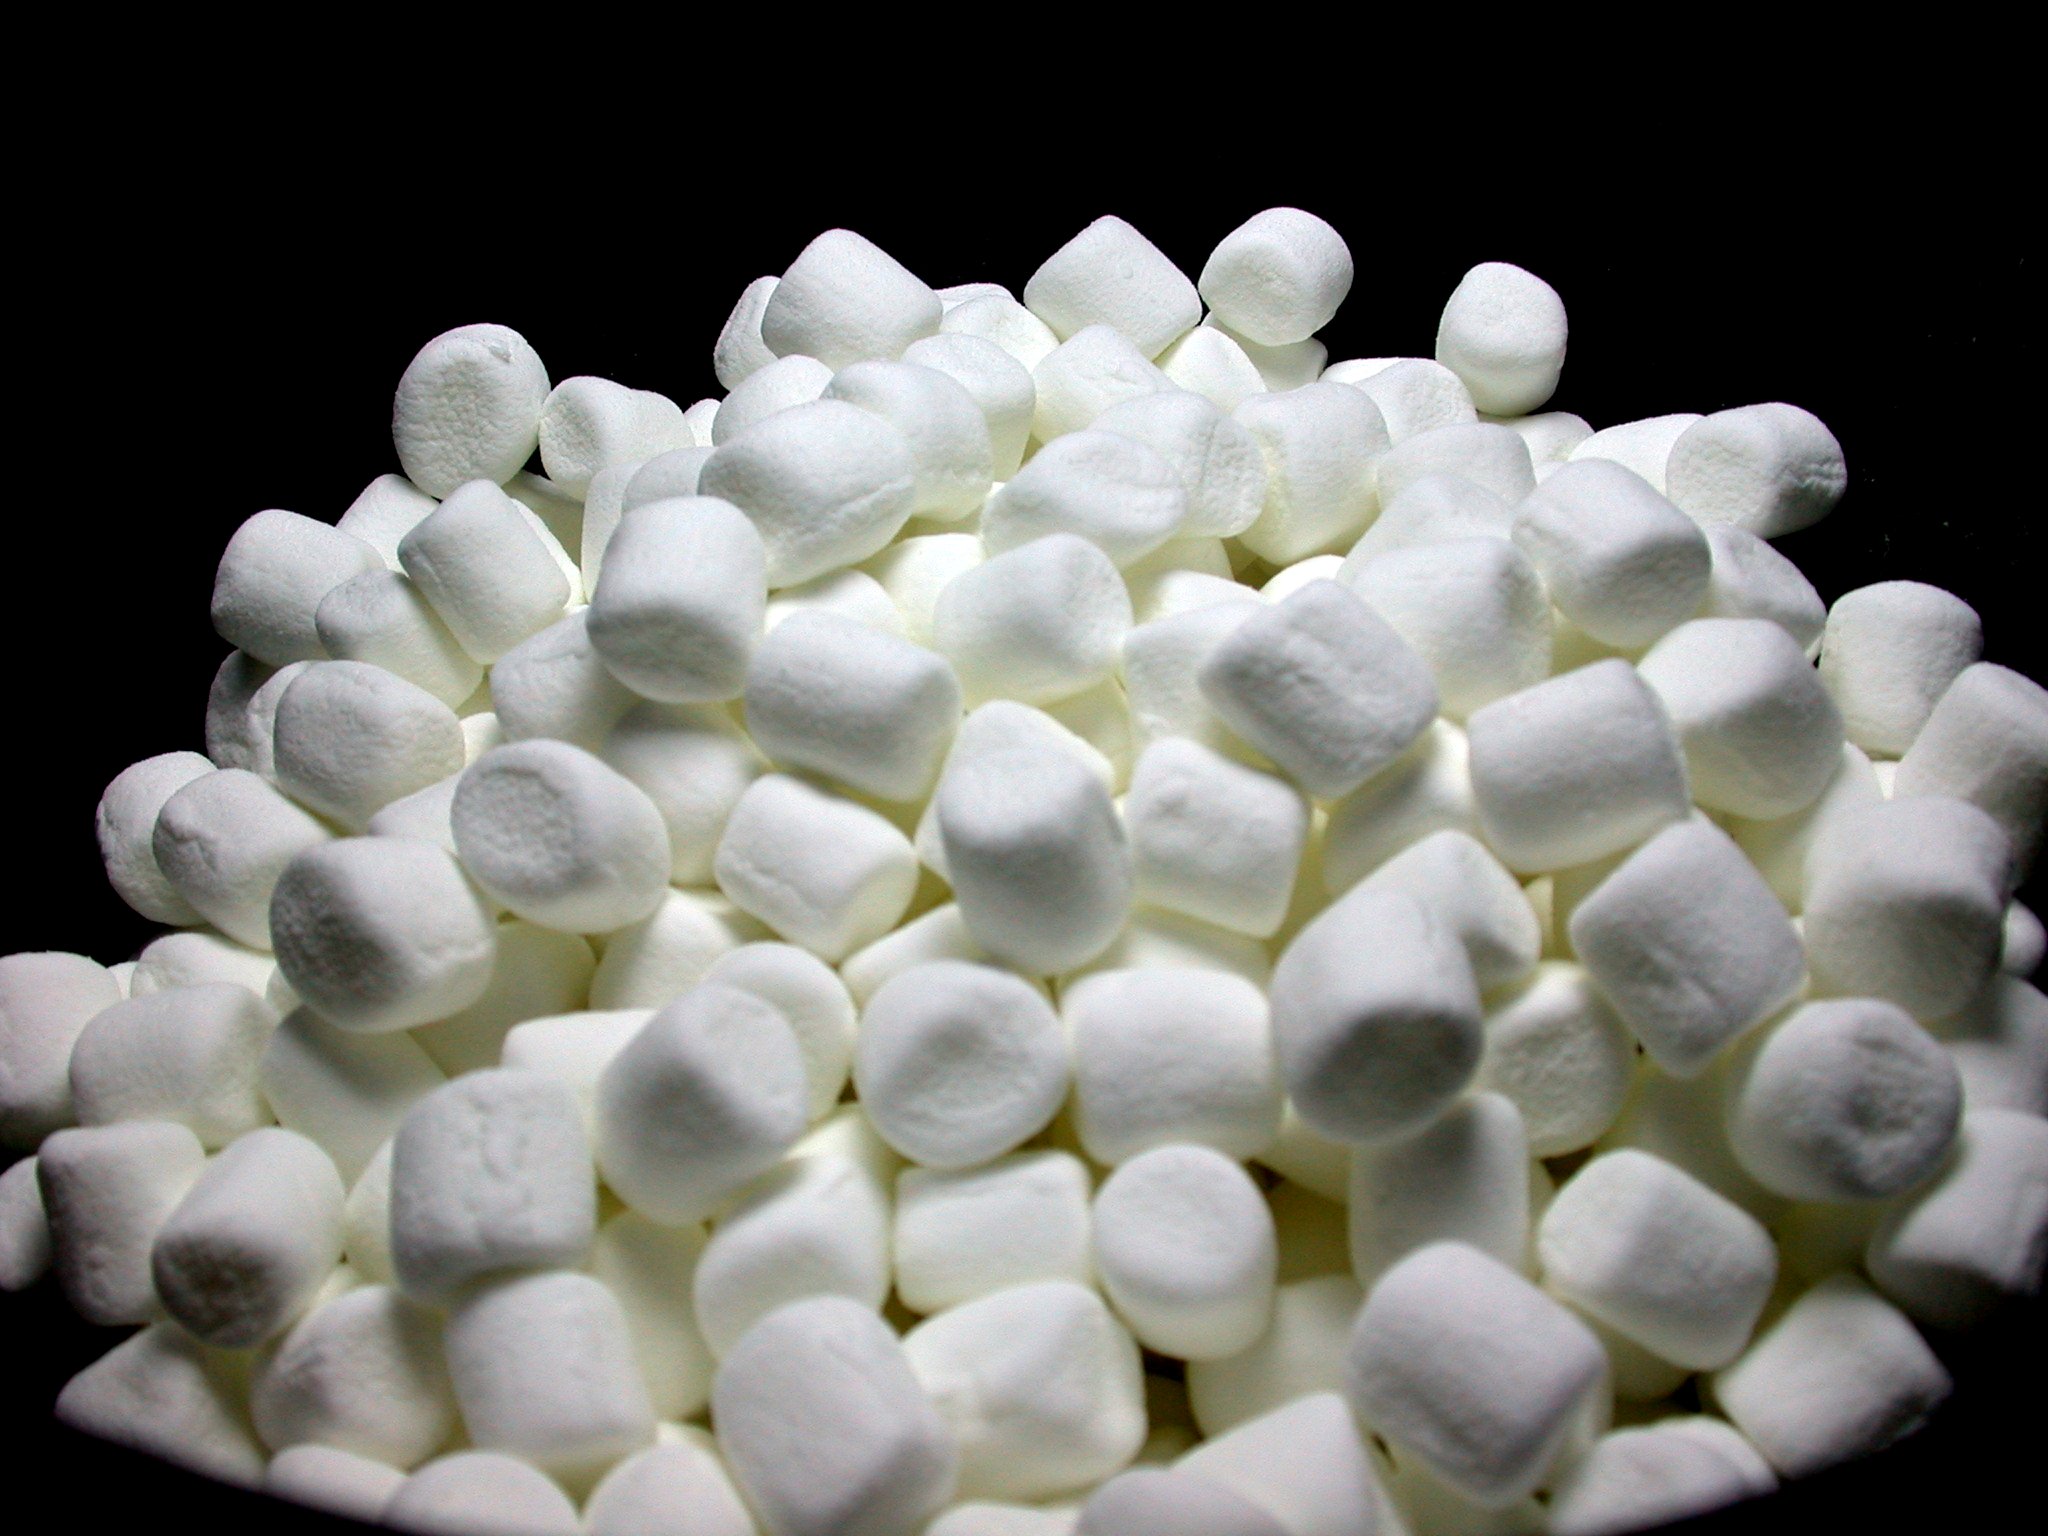 The Marshmallow Study Revisited: Does Our Willpower Increase Our Likelihood of Achievement?